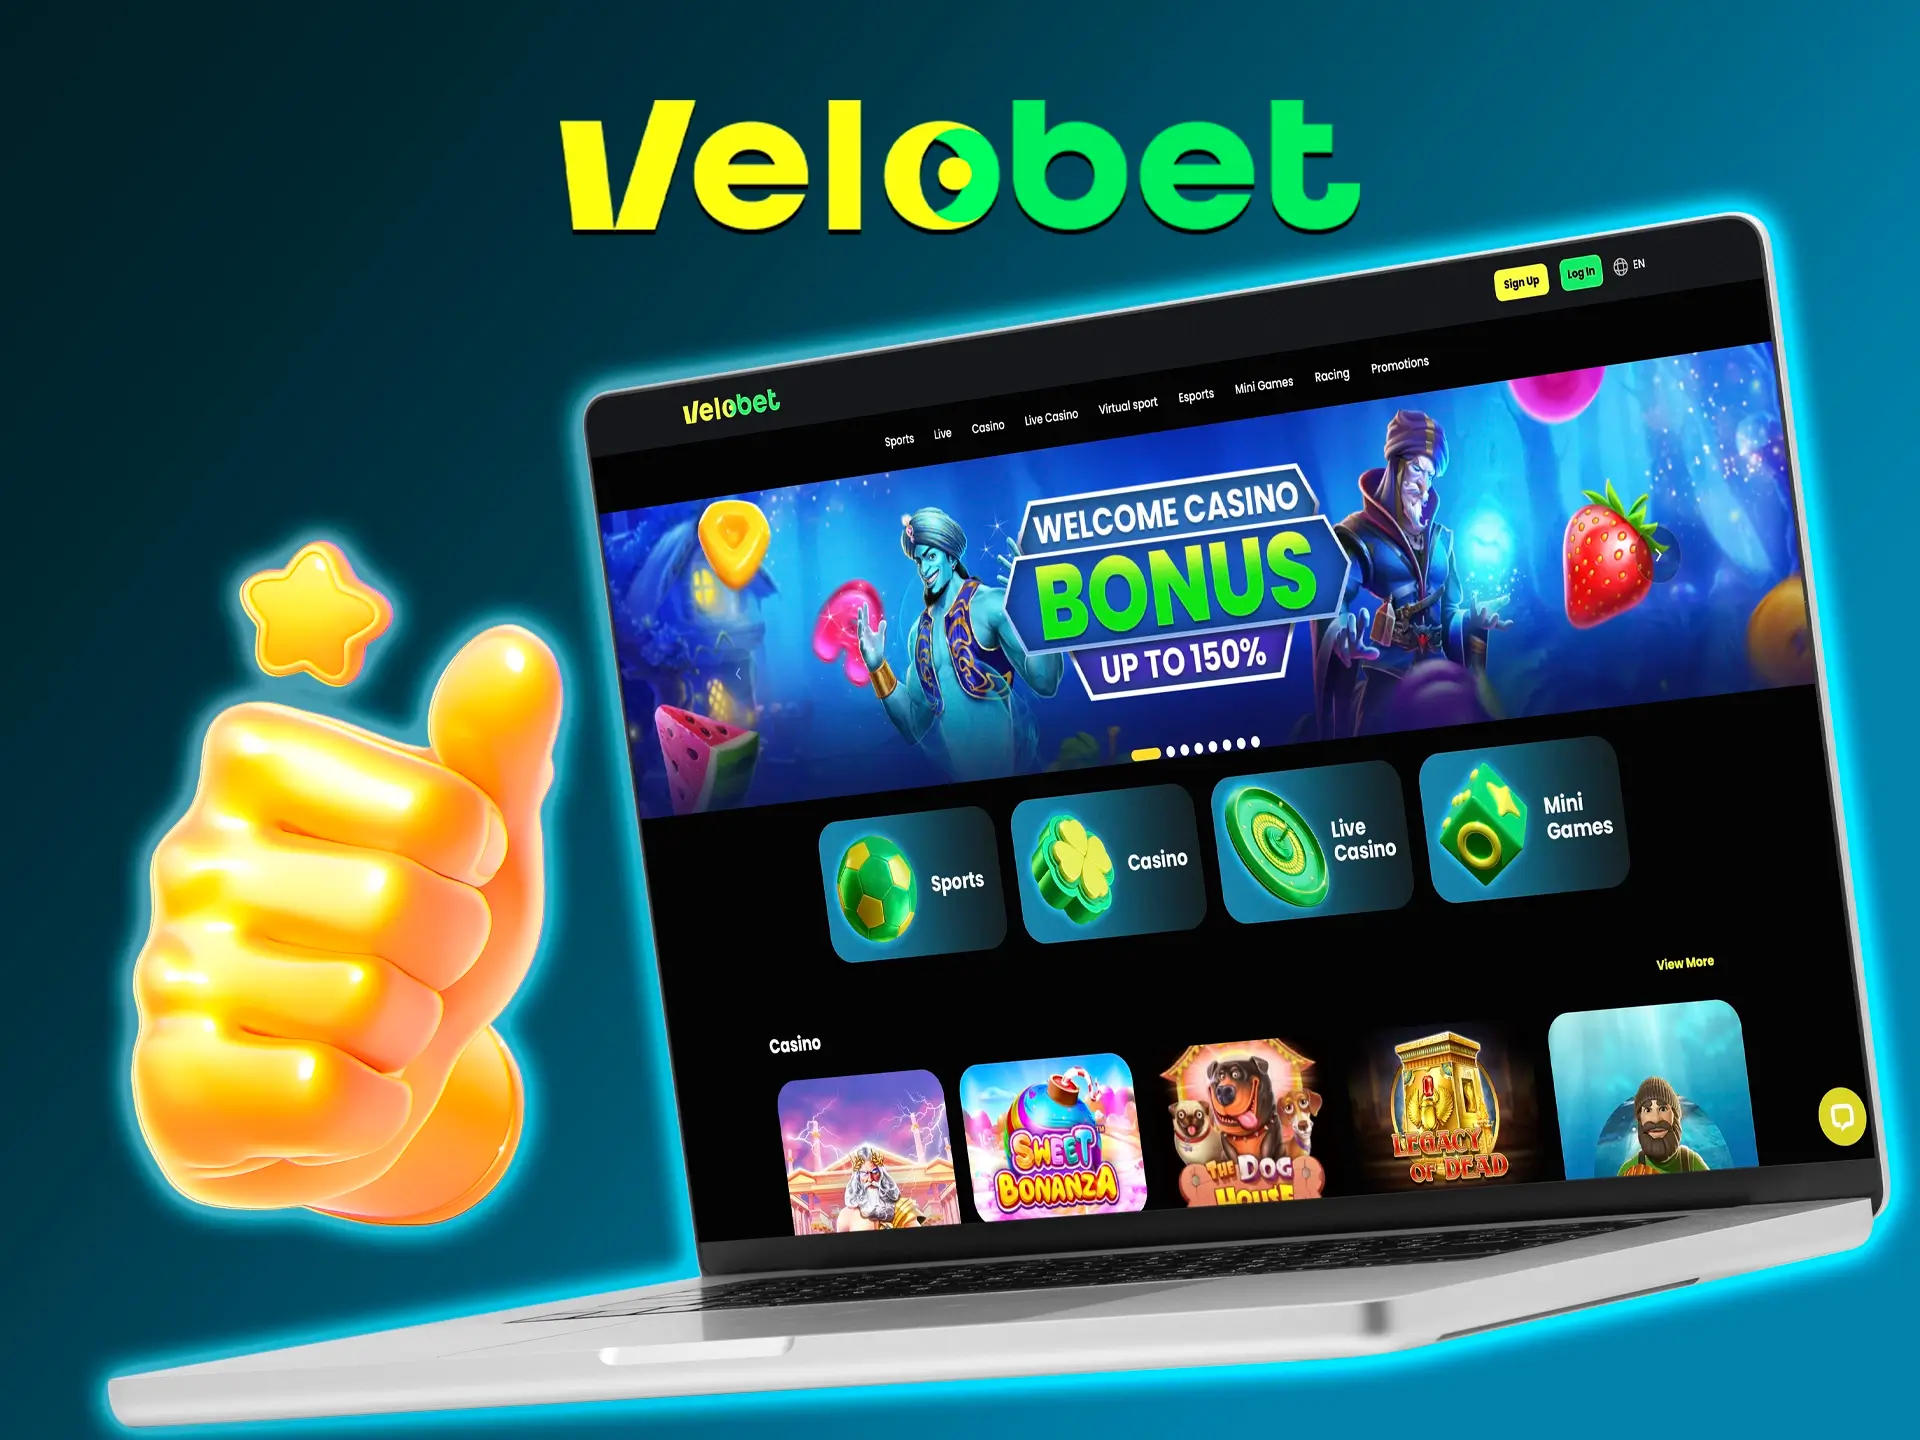 Velobet is a casino with a big name and high level of service.